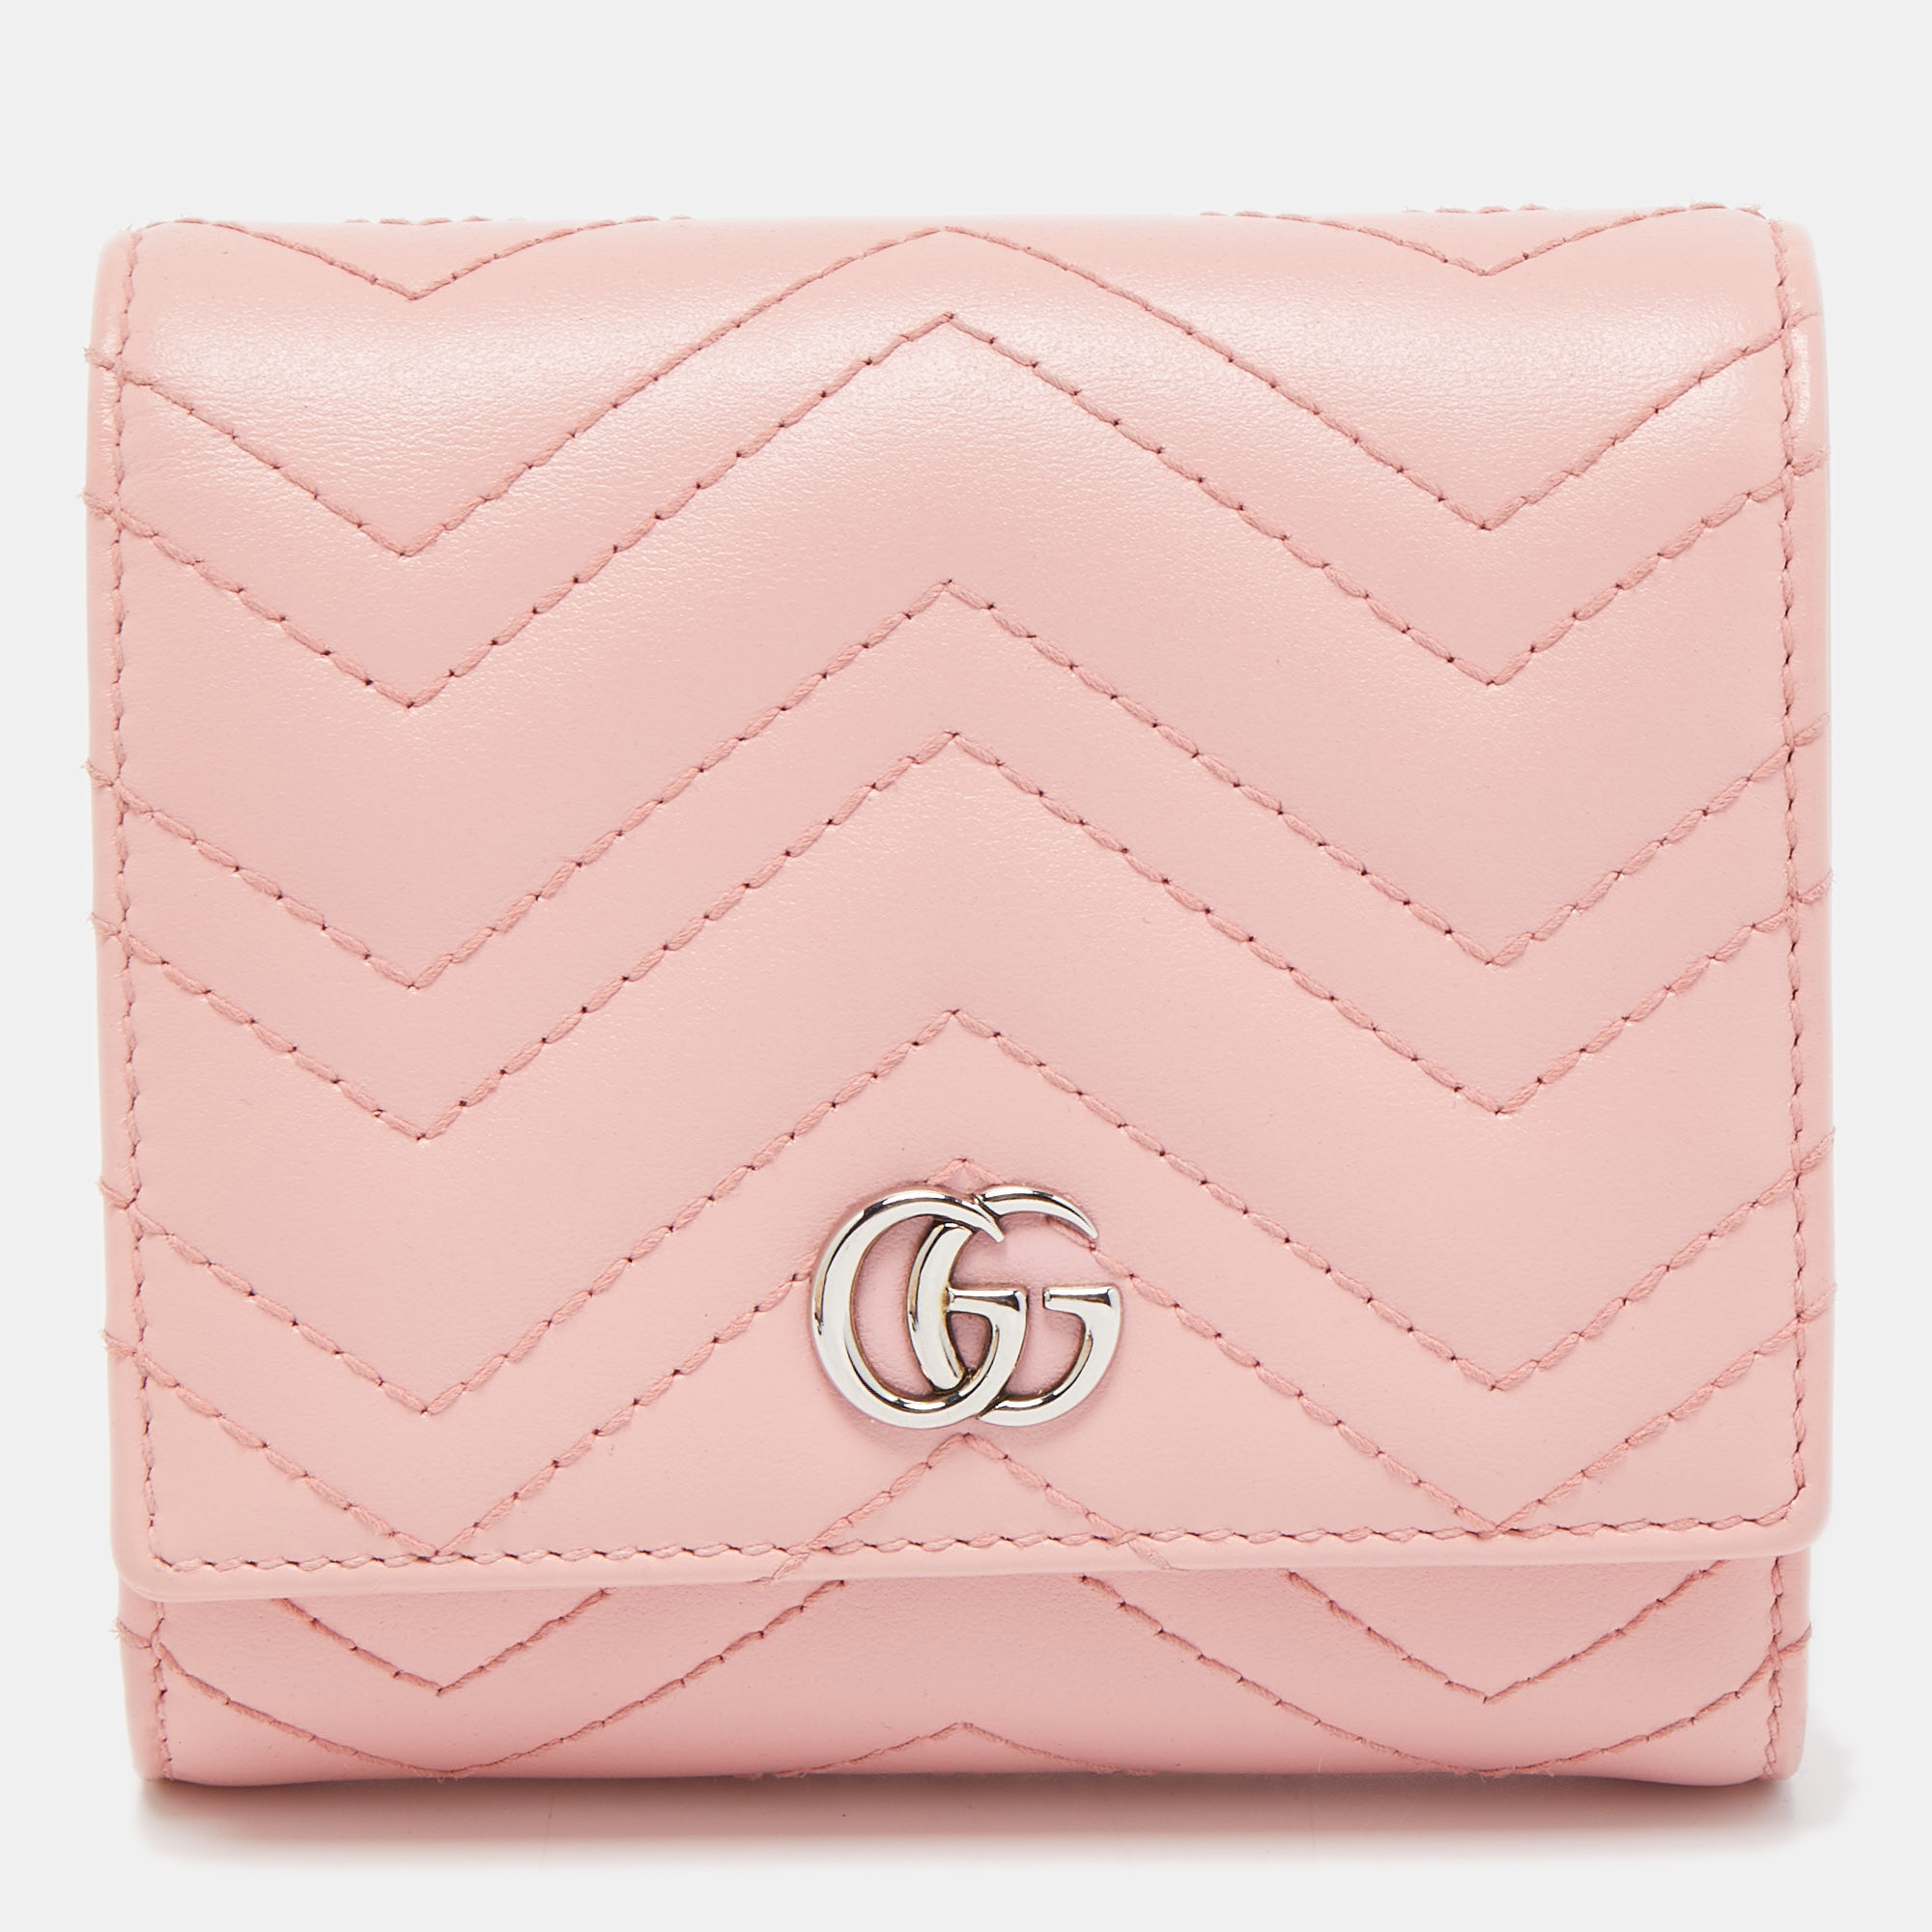 Gucci Marmont Matelasse GG Logo Compact Wallet - Pink Wallets, Accessories  - GUC1323878